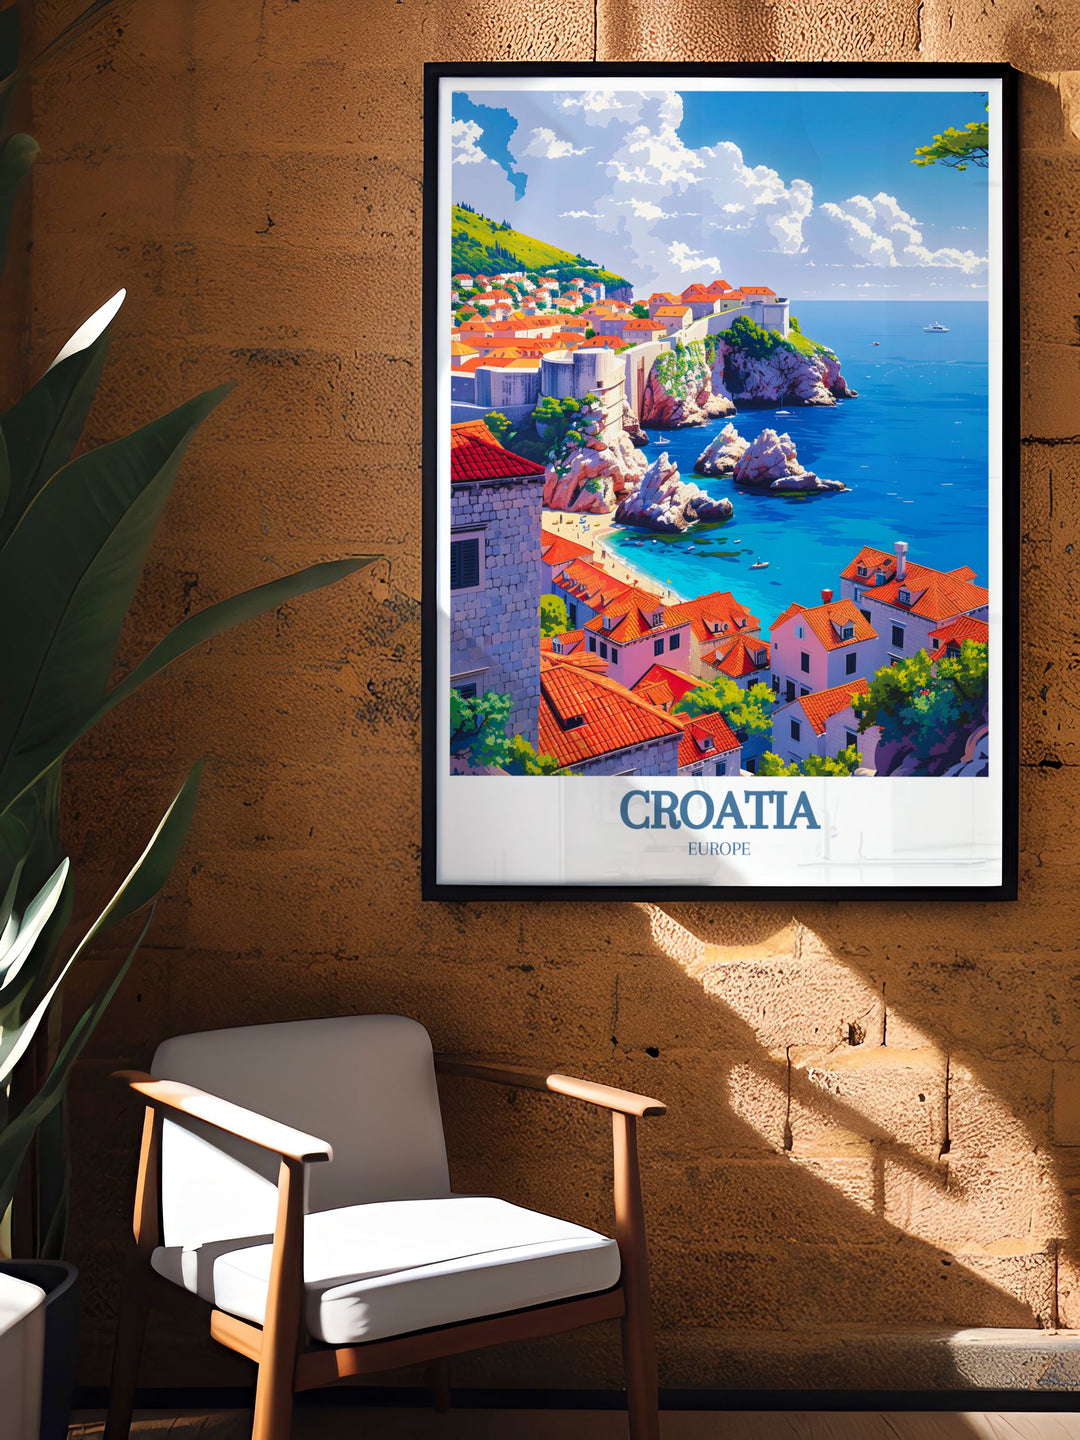 Showcasing the lush landscapes of Dubrovnik Old Town and the coastal charm of the Adriatic Sea, this poster is ideal for art lovers who appreciate the diverse and stunning beauty of Croatia.